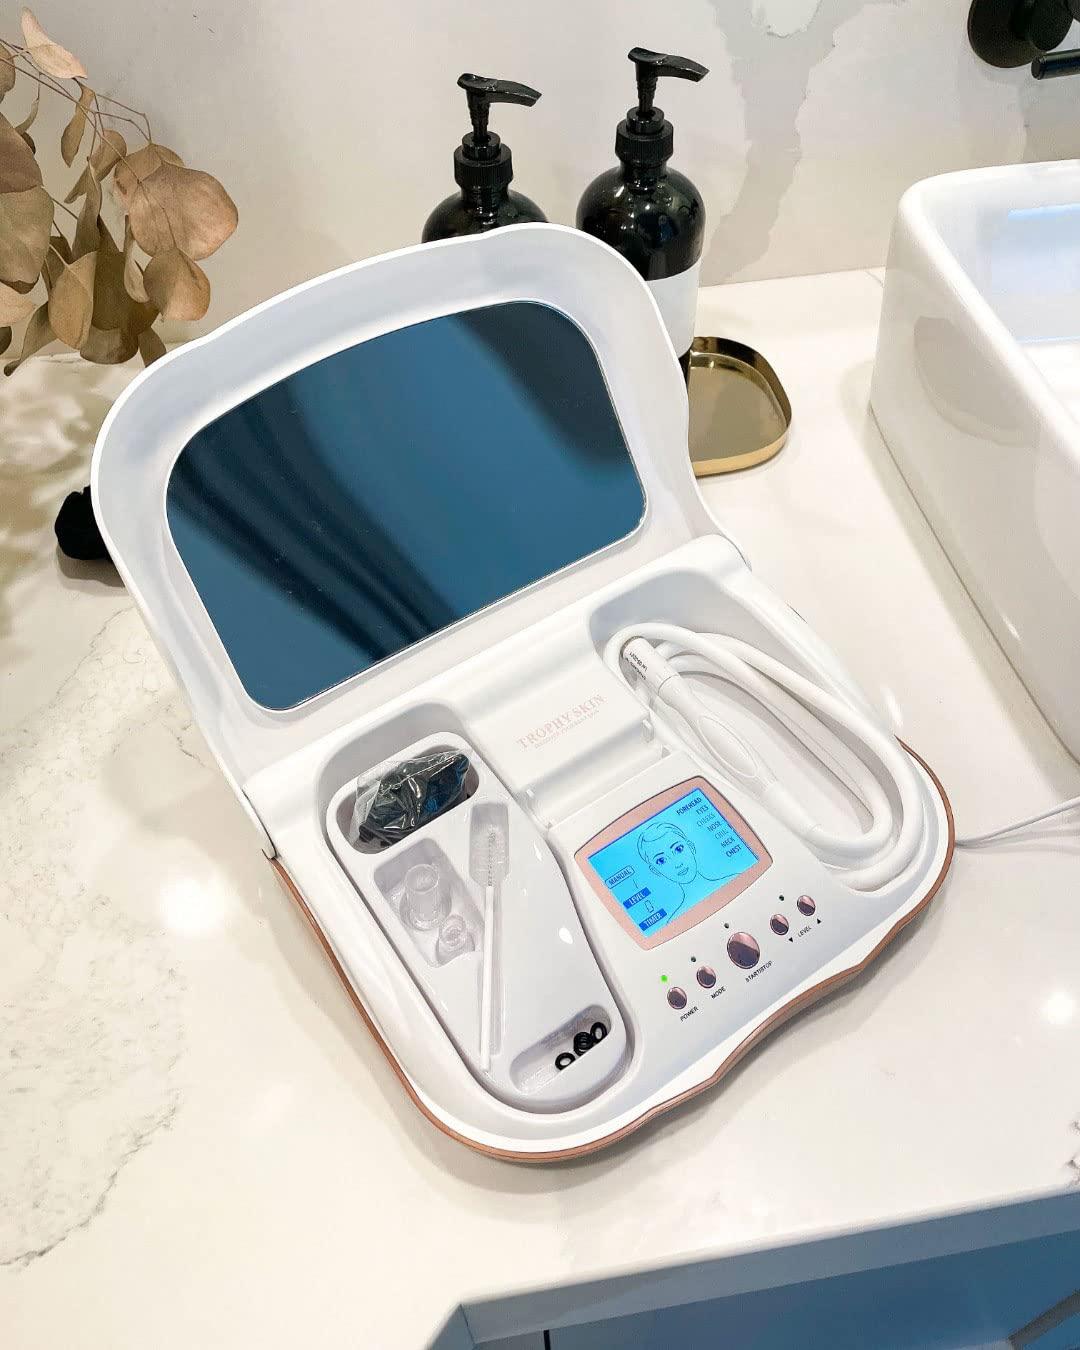 Trophy Skin MicrodermMD at Home Microdermabrasion Beauty System for  Exfoliation and Anti-Aging